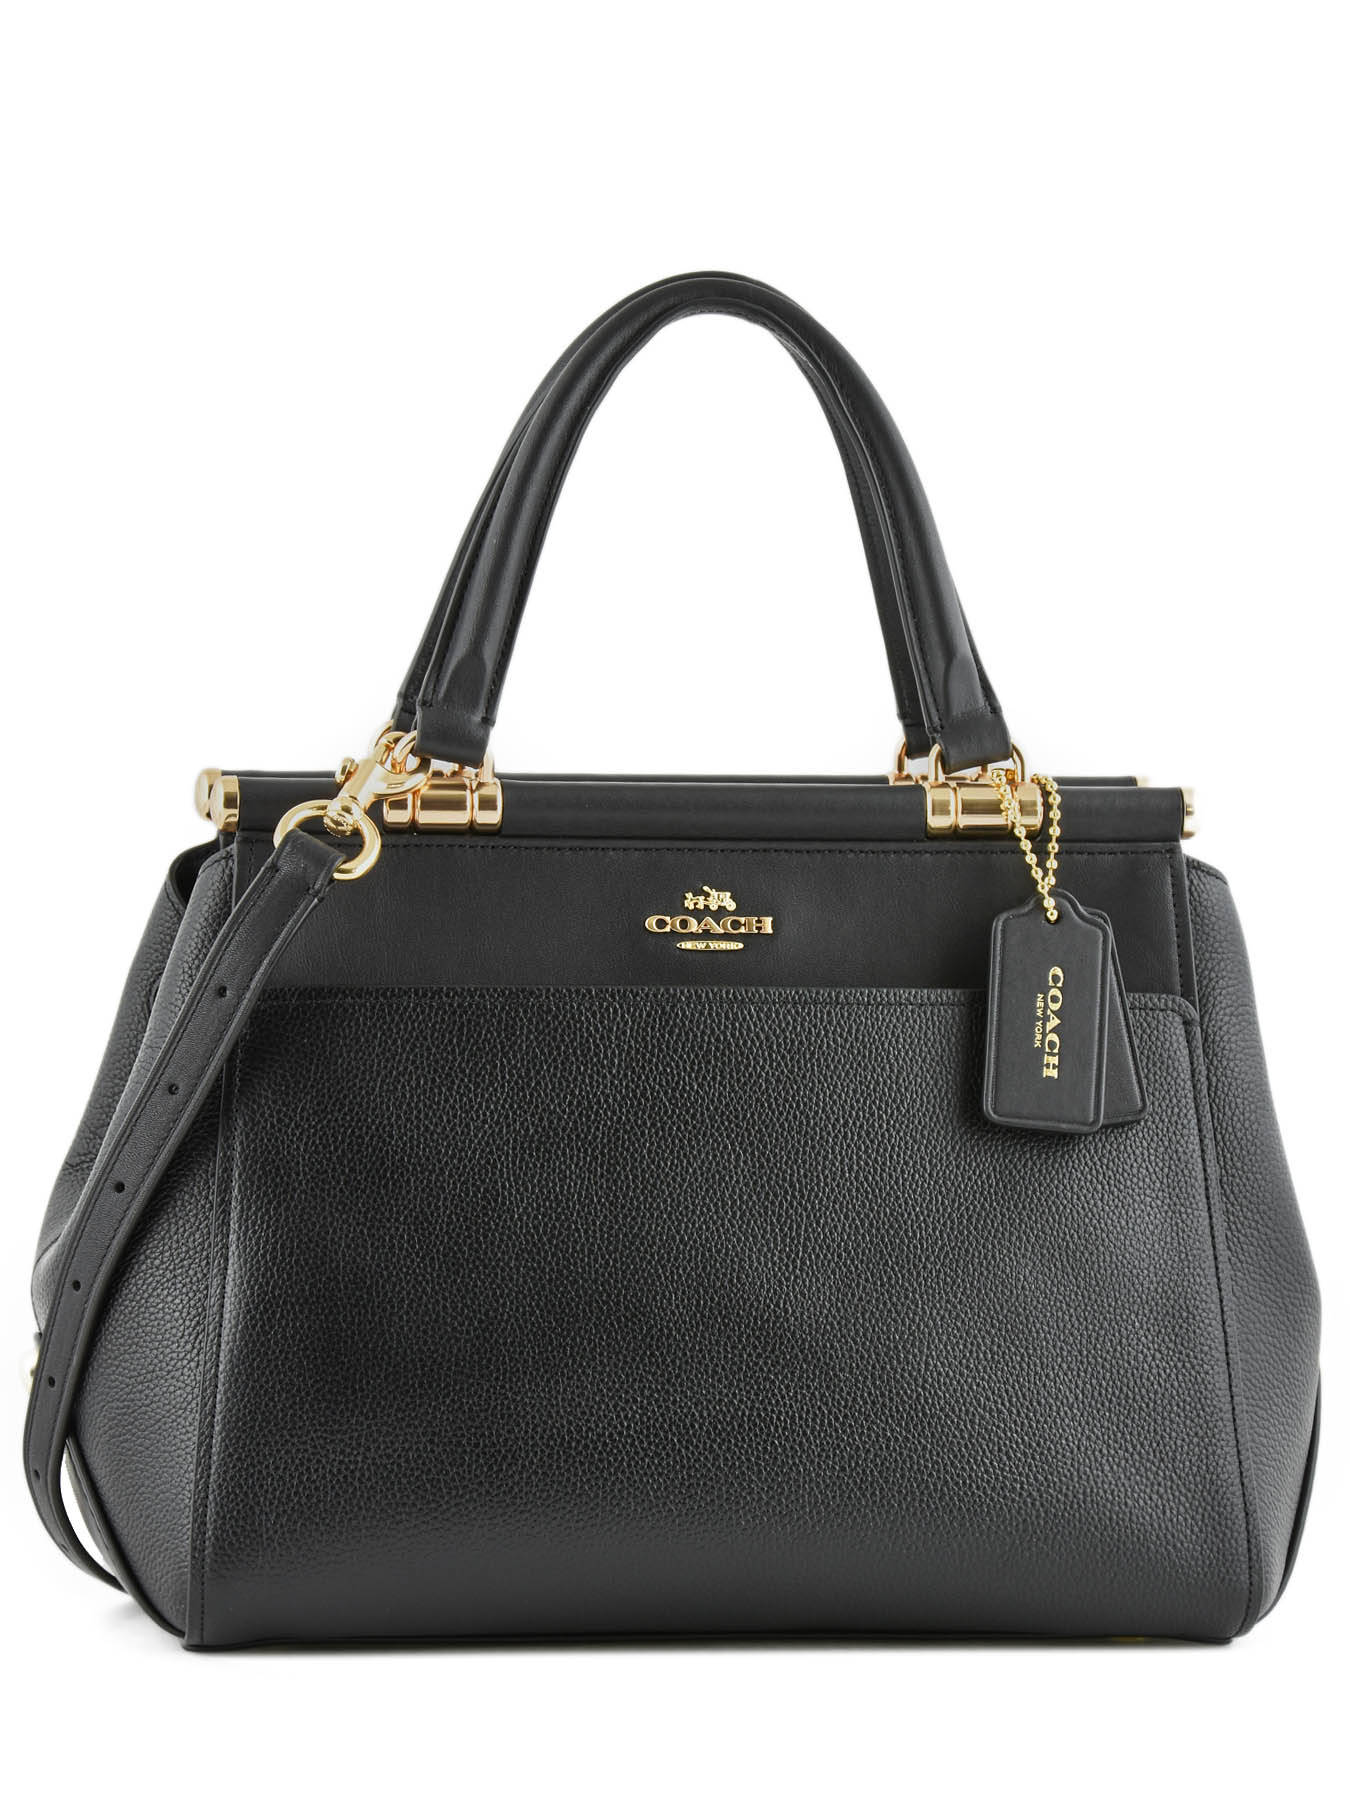 Coach Tote 21343 - free shipping available